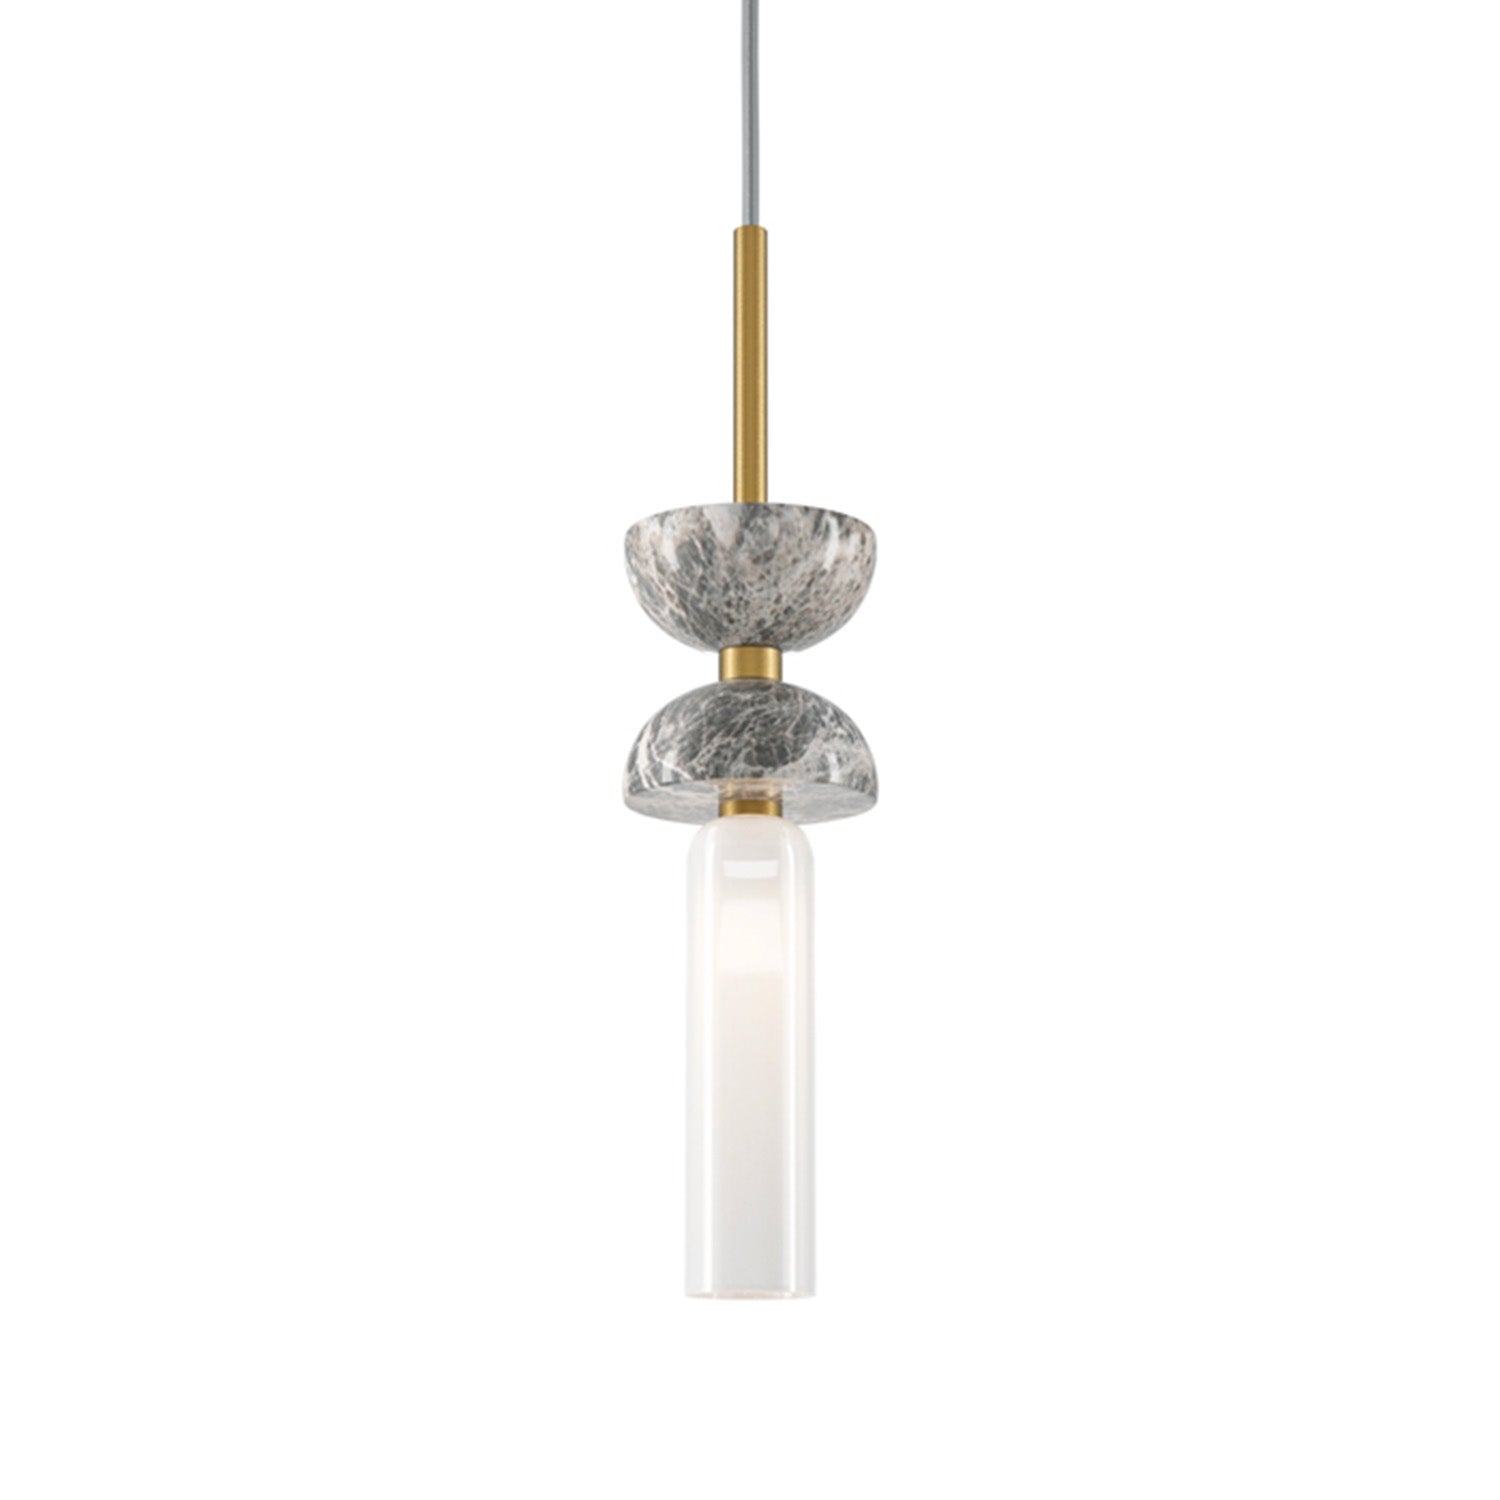 KYOTO - Designer and chic pendant light in marble and glass